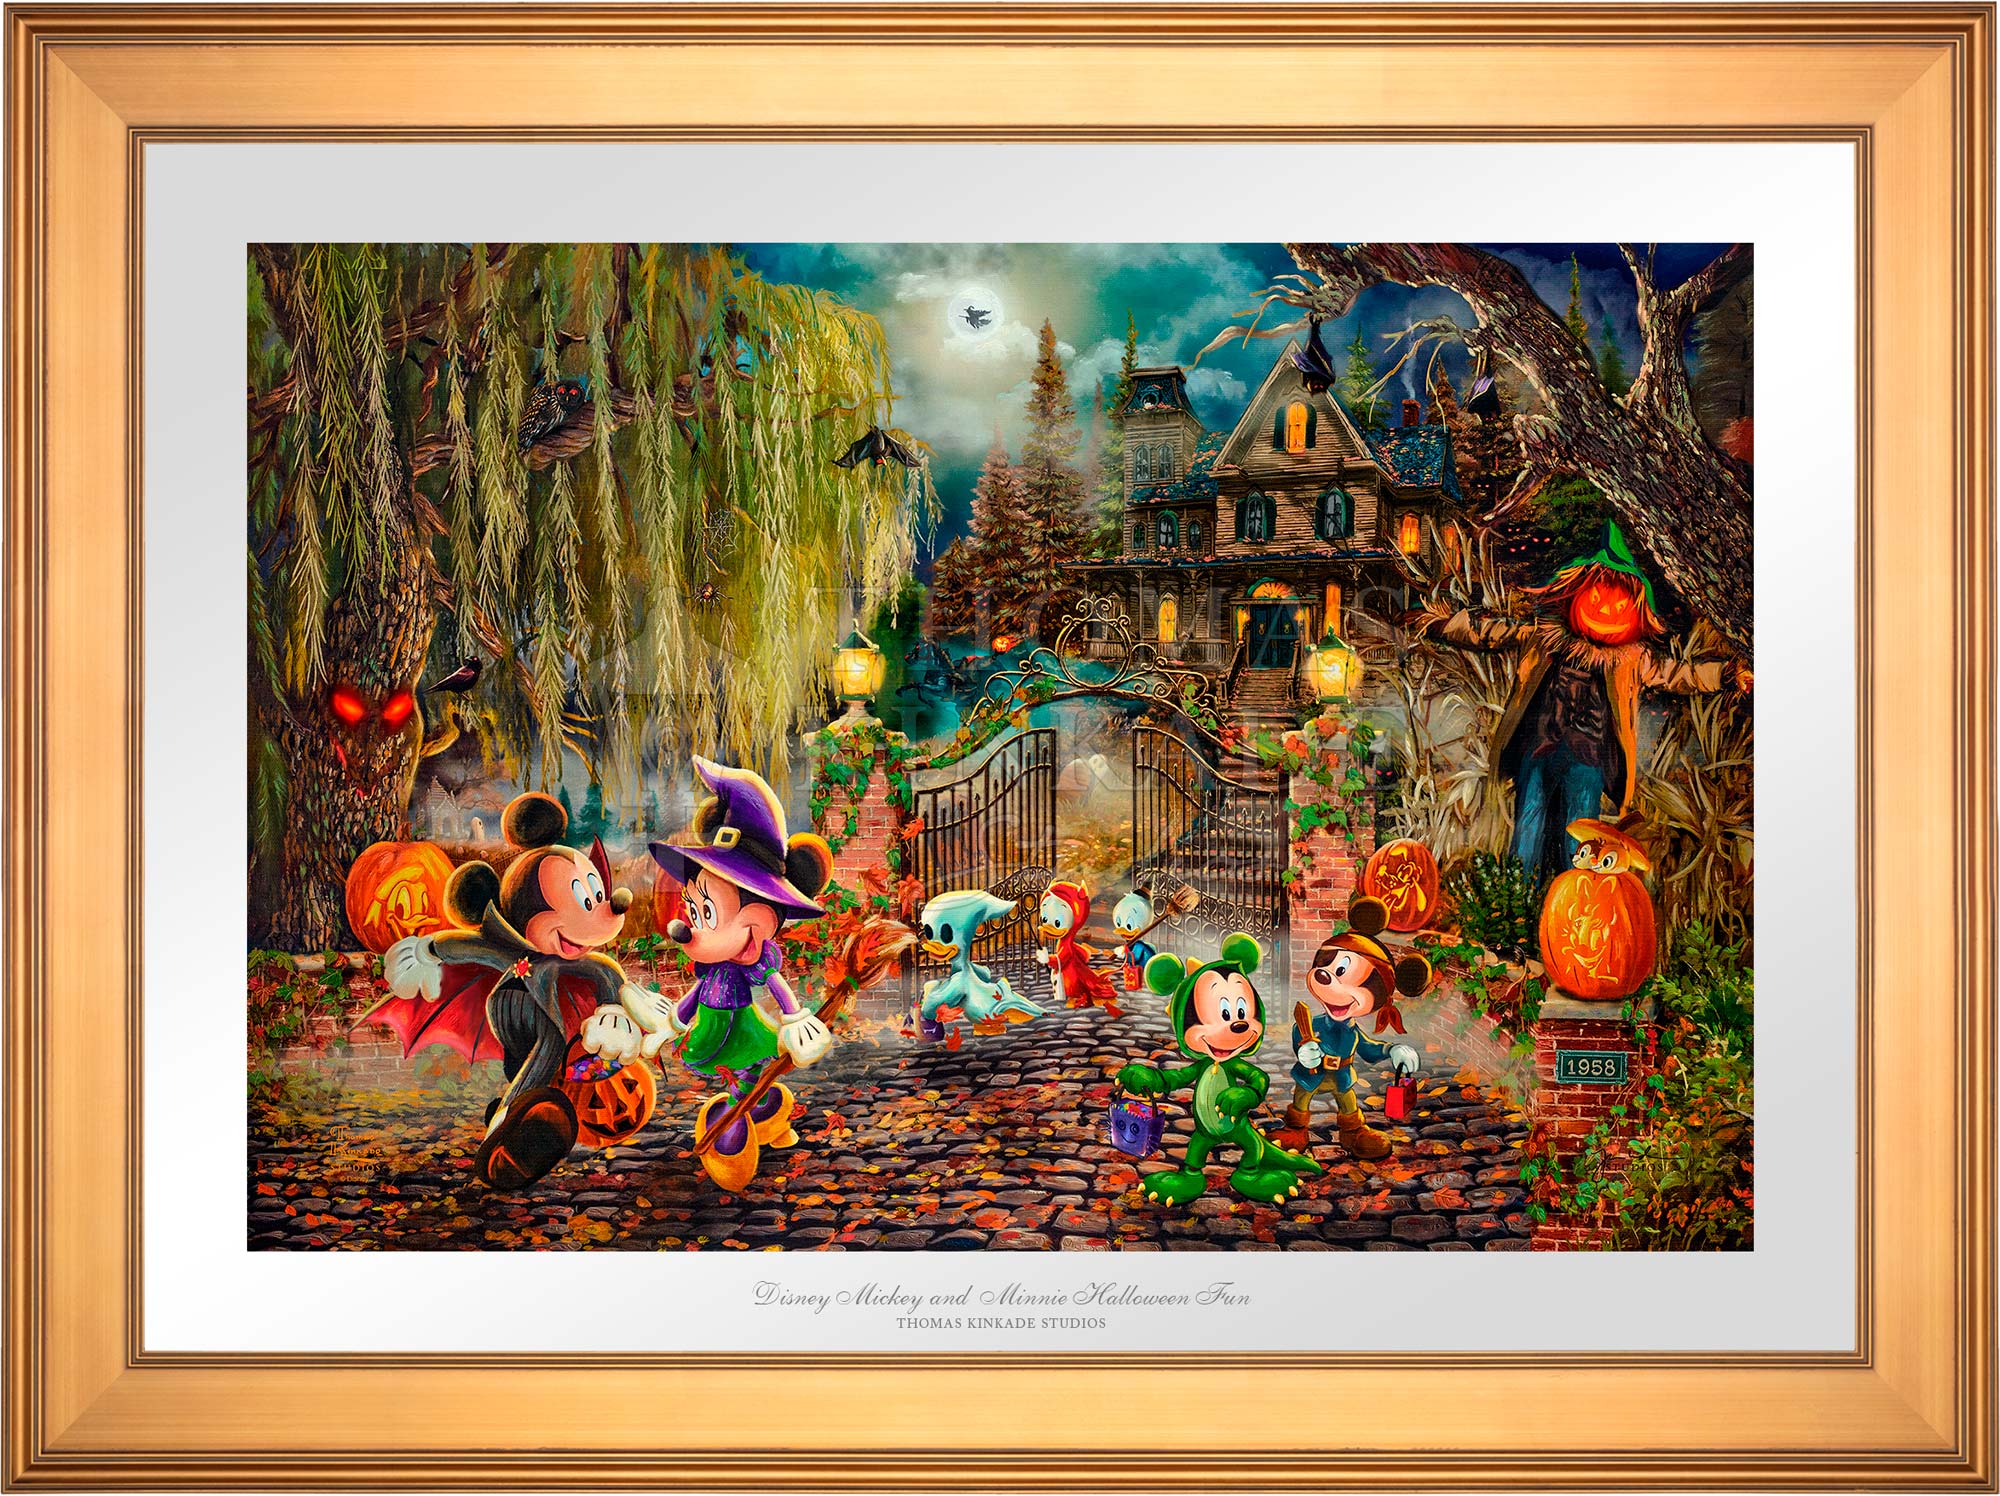 Disney Mickey and Minnie Halloween Fun - Limited Edition Paper